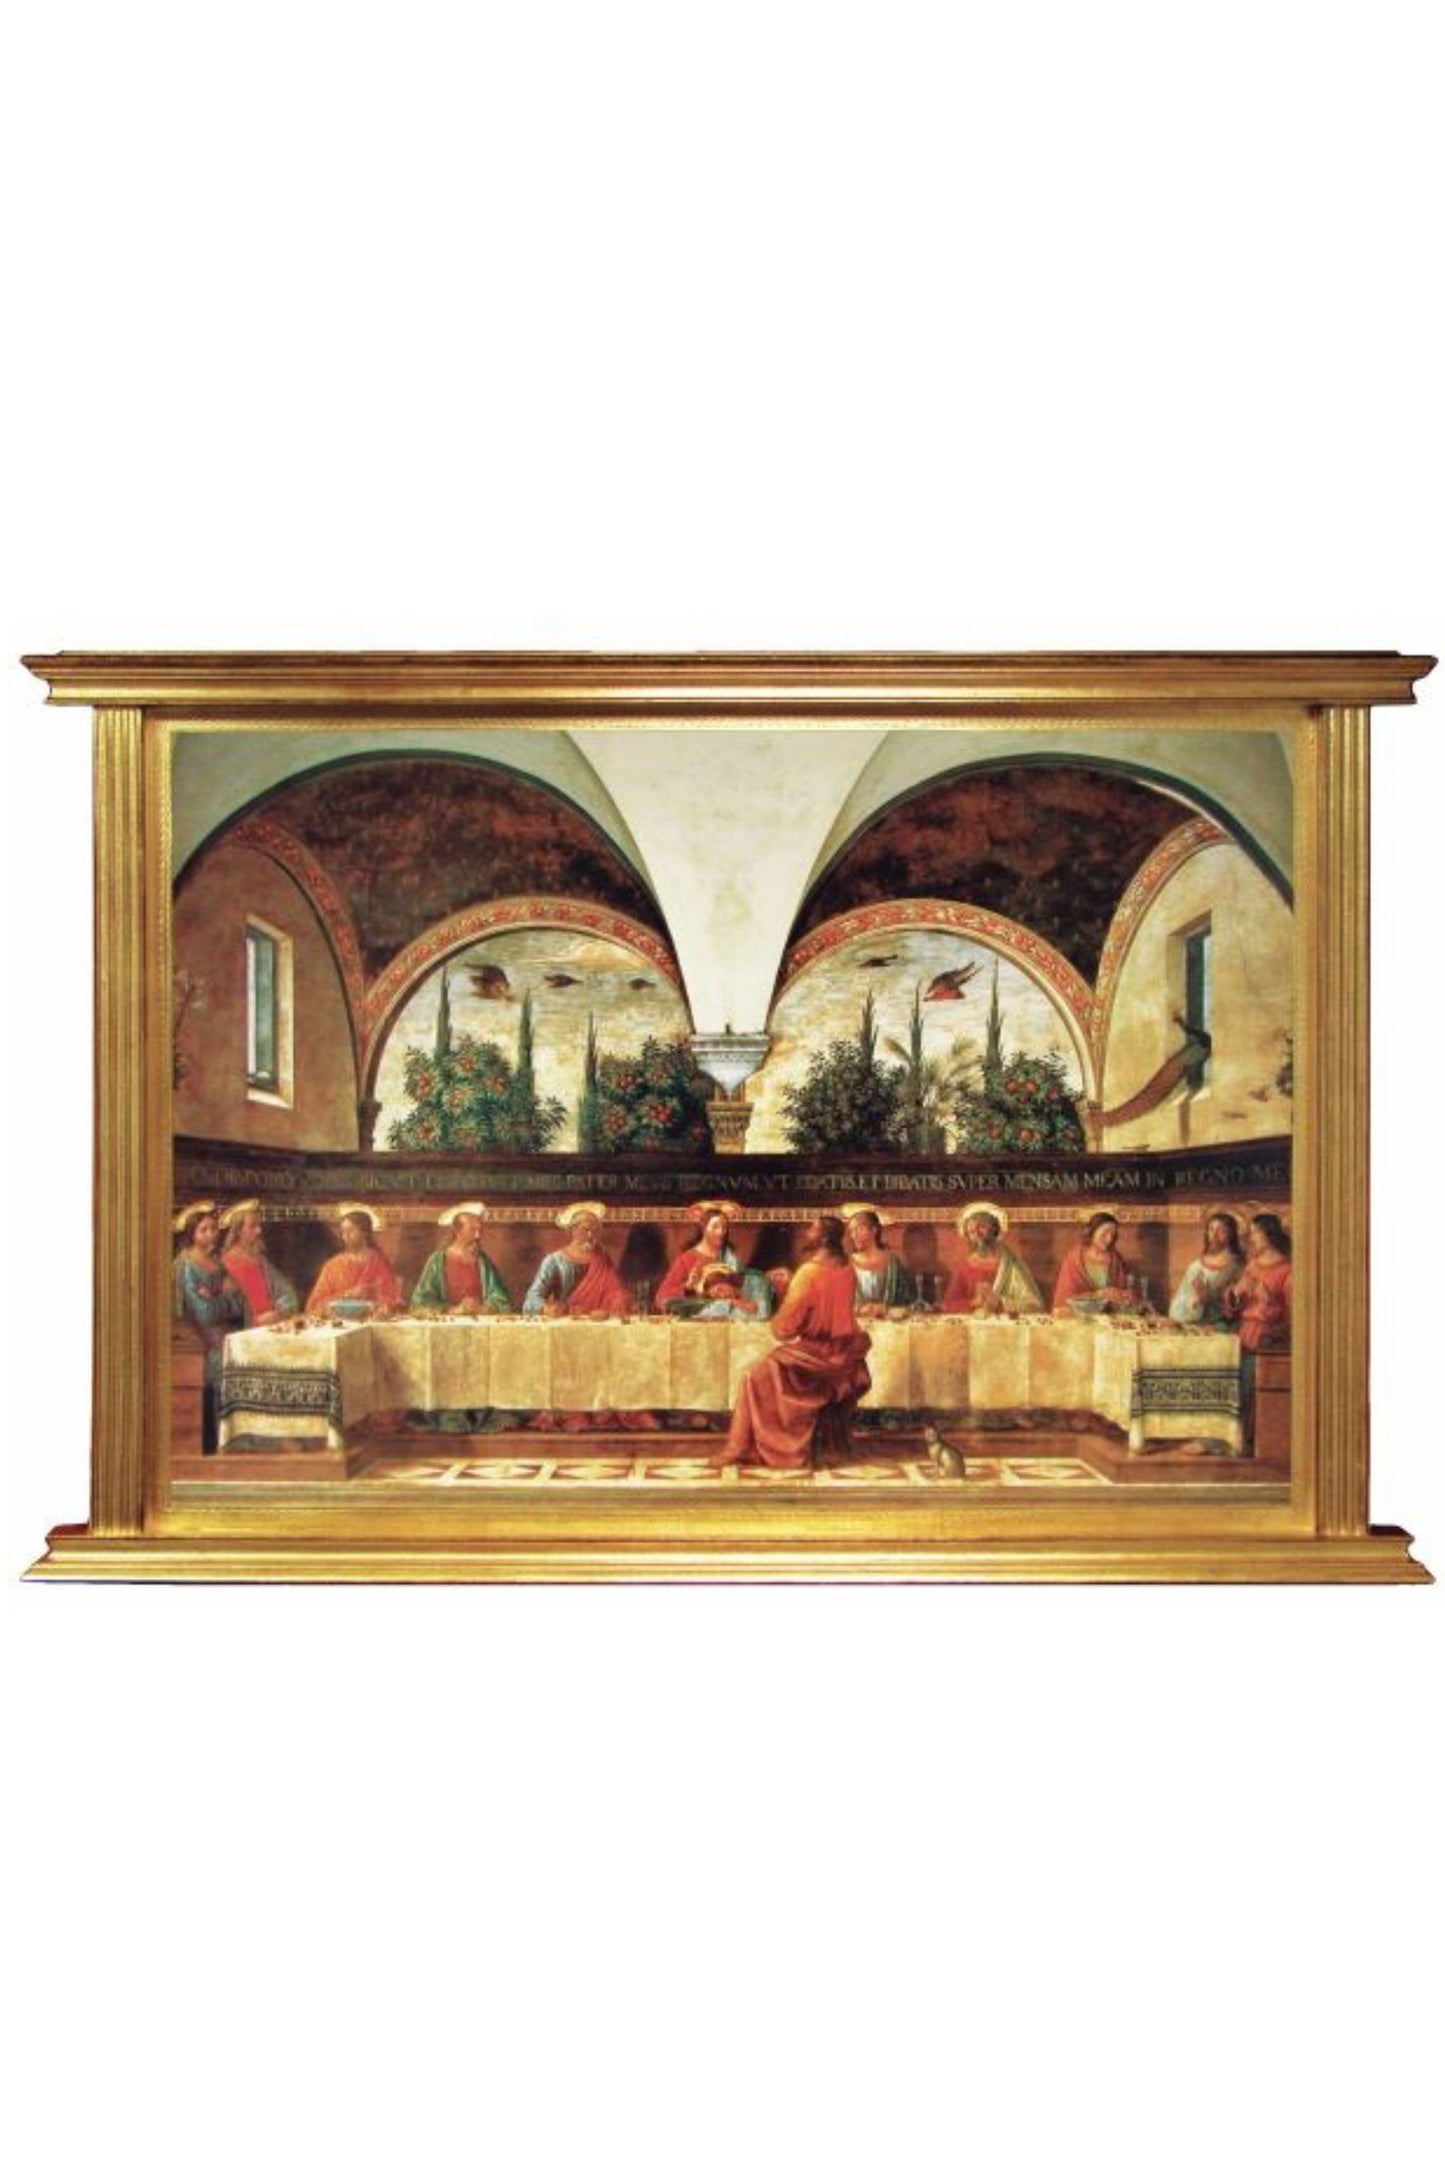 L-2028 Framed Last Supper Florentine Plaque by Ghirlandaio 57x39"